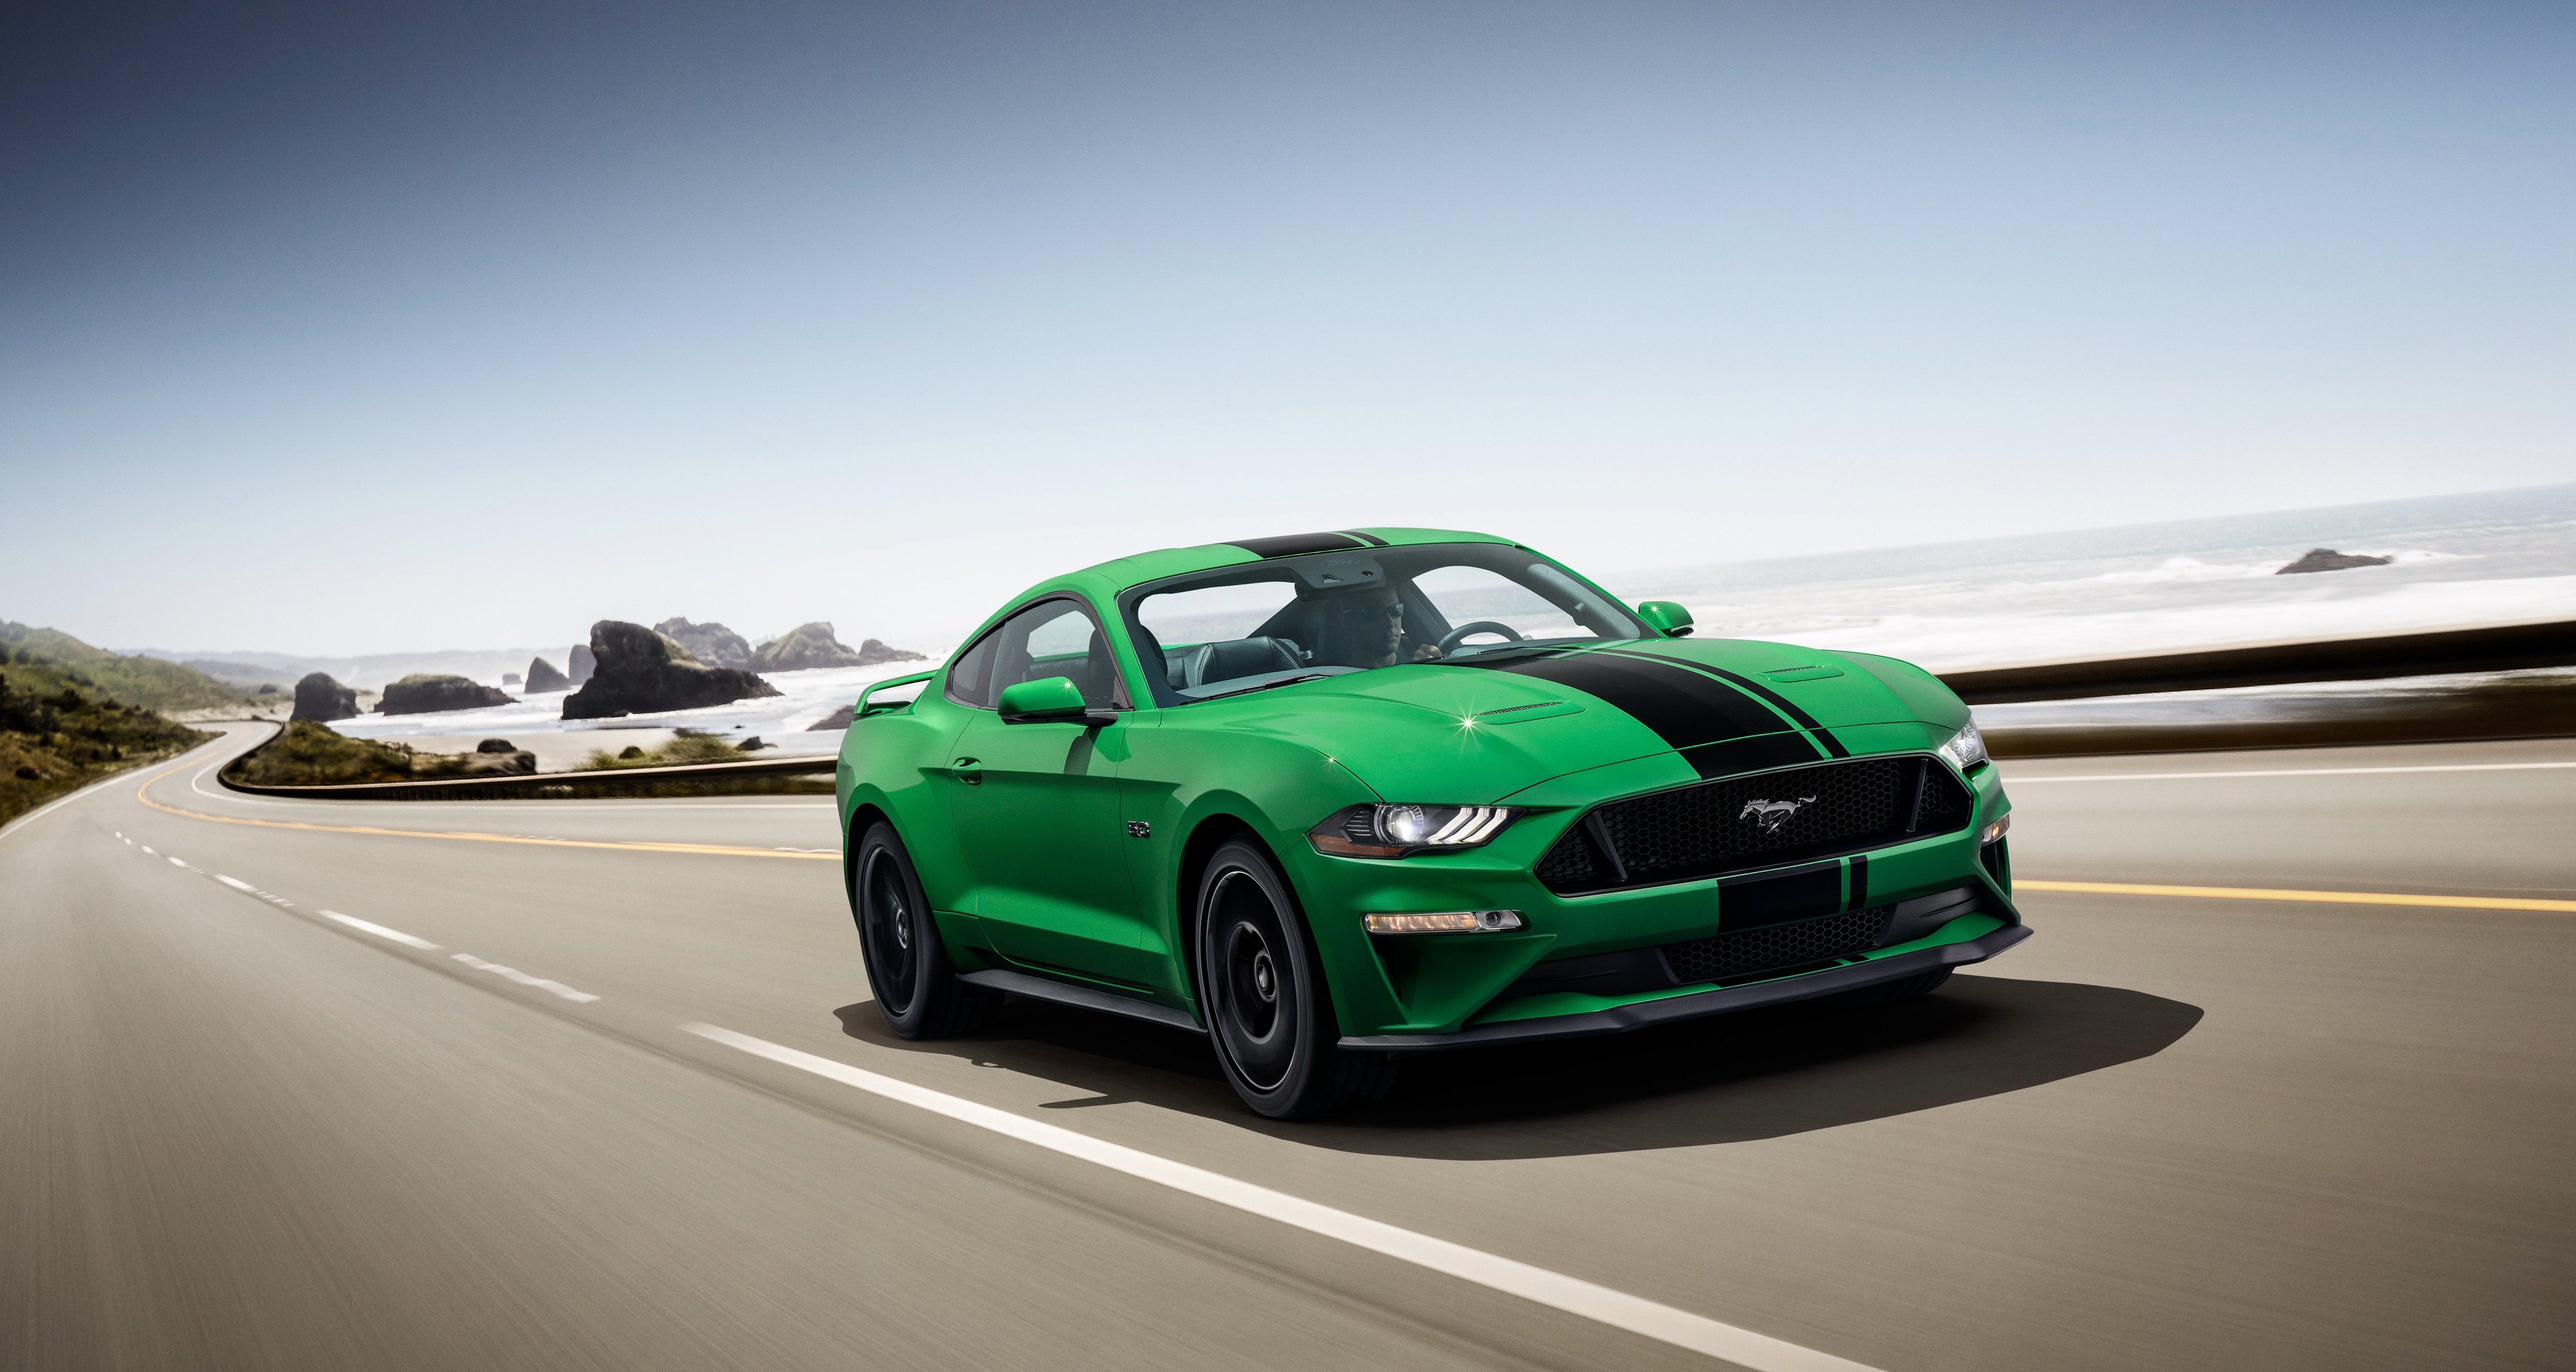 Car Ford Ford Mustang Ford Mustang Gt Green Car Muscle Car Vehicle 4096x2182